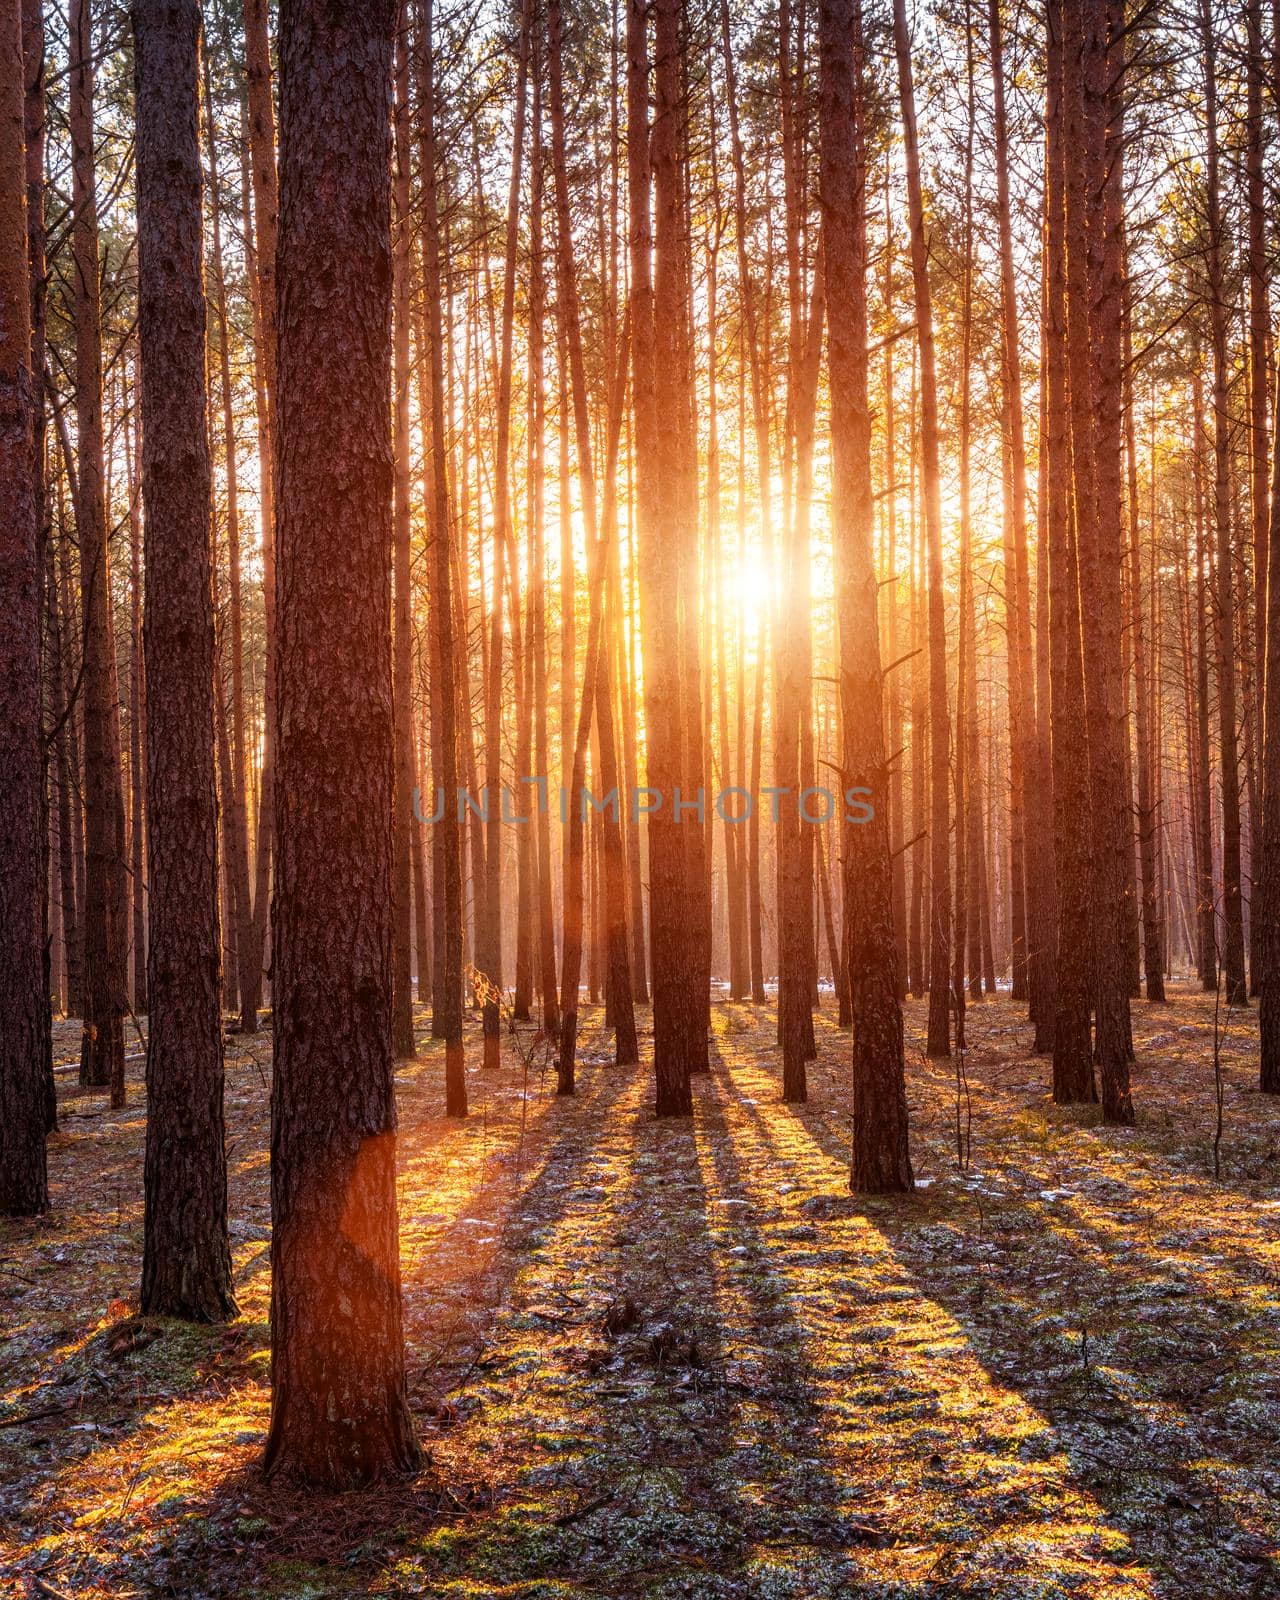 Sunbeams illuminating the trunks of pine trees at sunset or sunrise in an autumn or early winter pine forest.